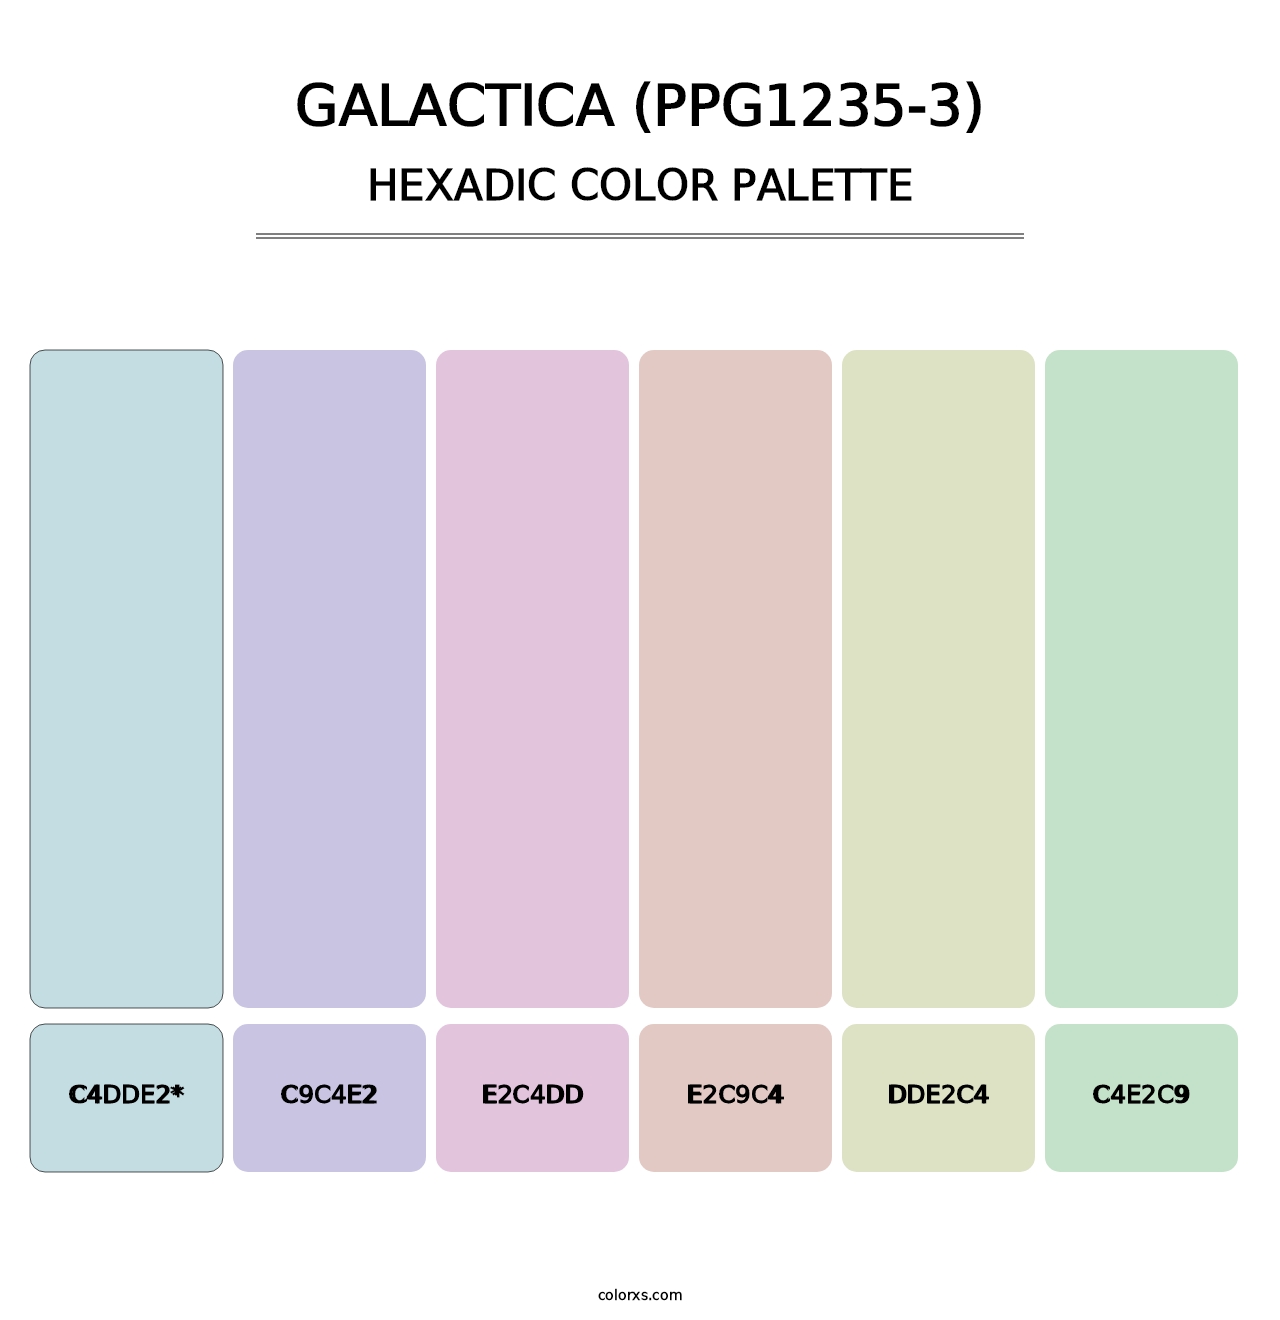 Galactica (PPG1235-3) - Hexadic Color Palette